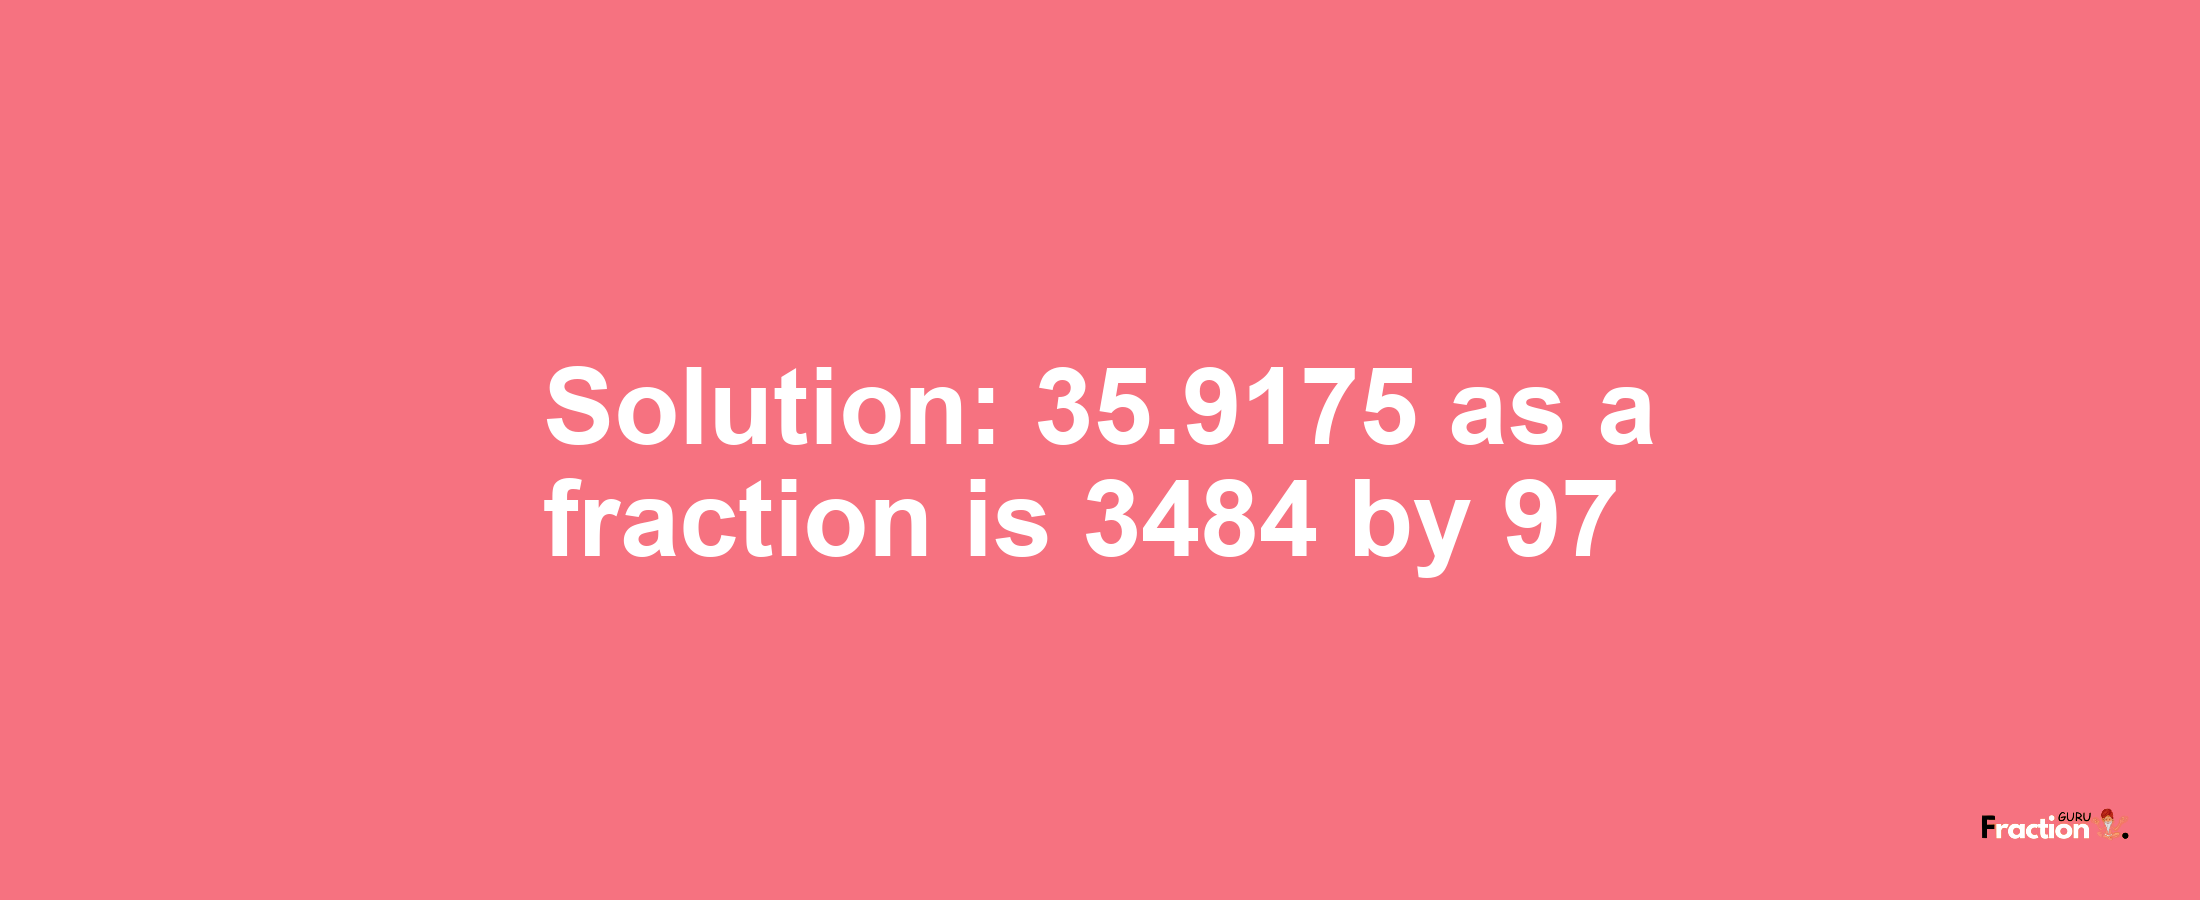 Solution:35.9175 as a fraction is 3484/97